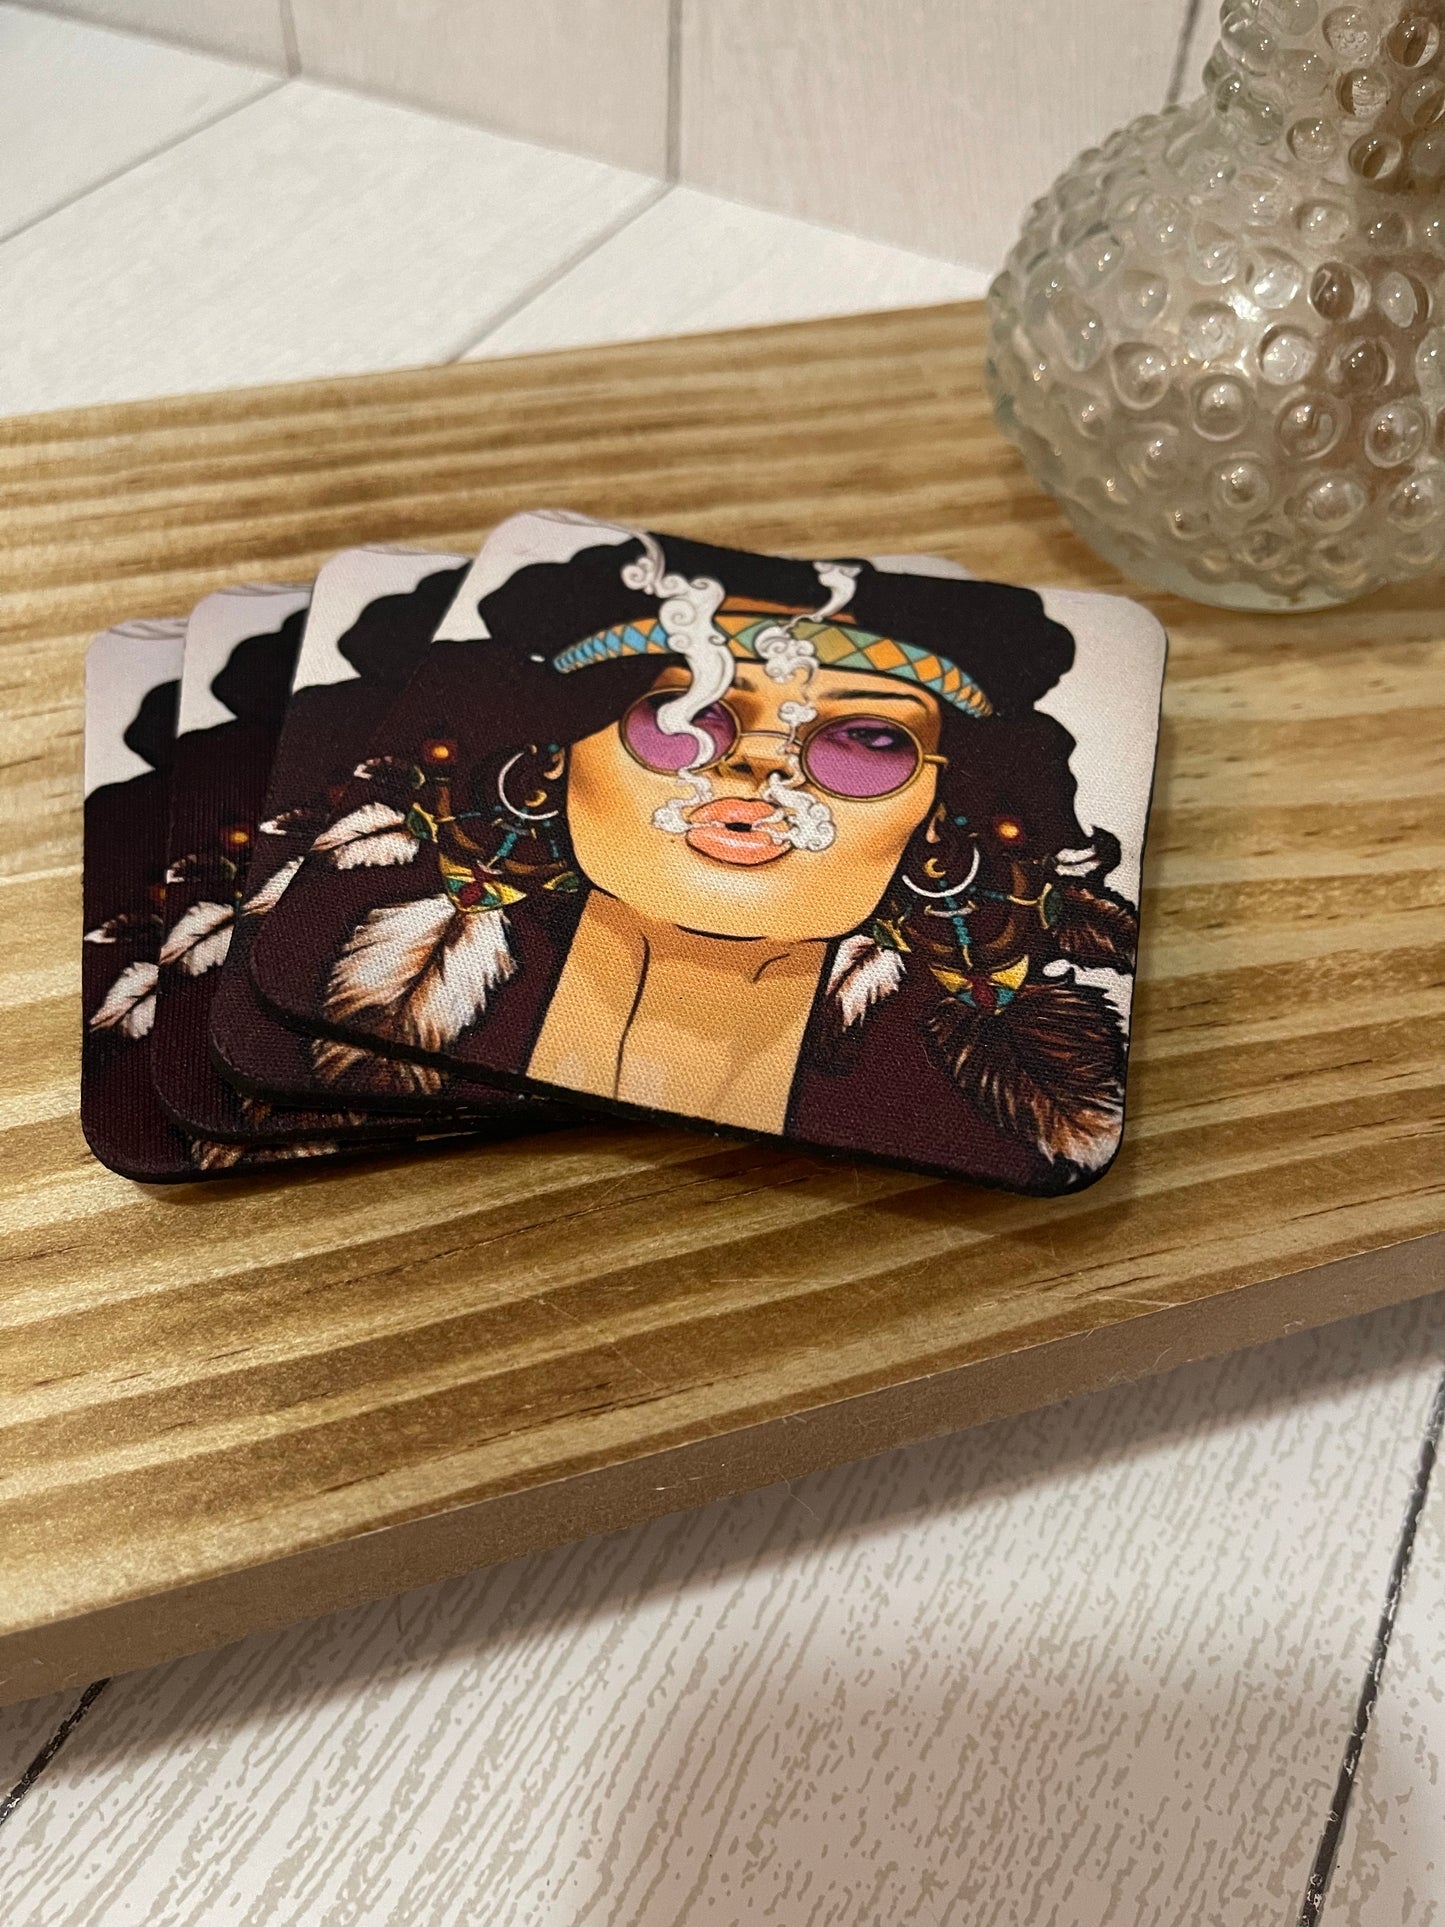 Rubber Drink Coasters